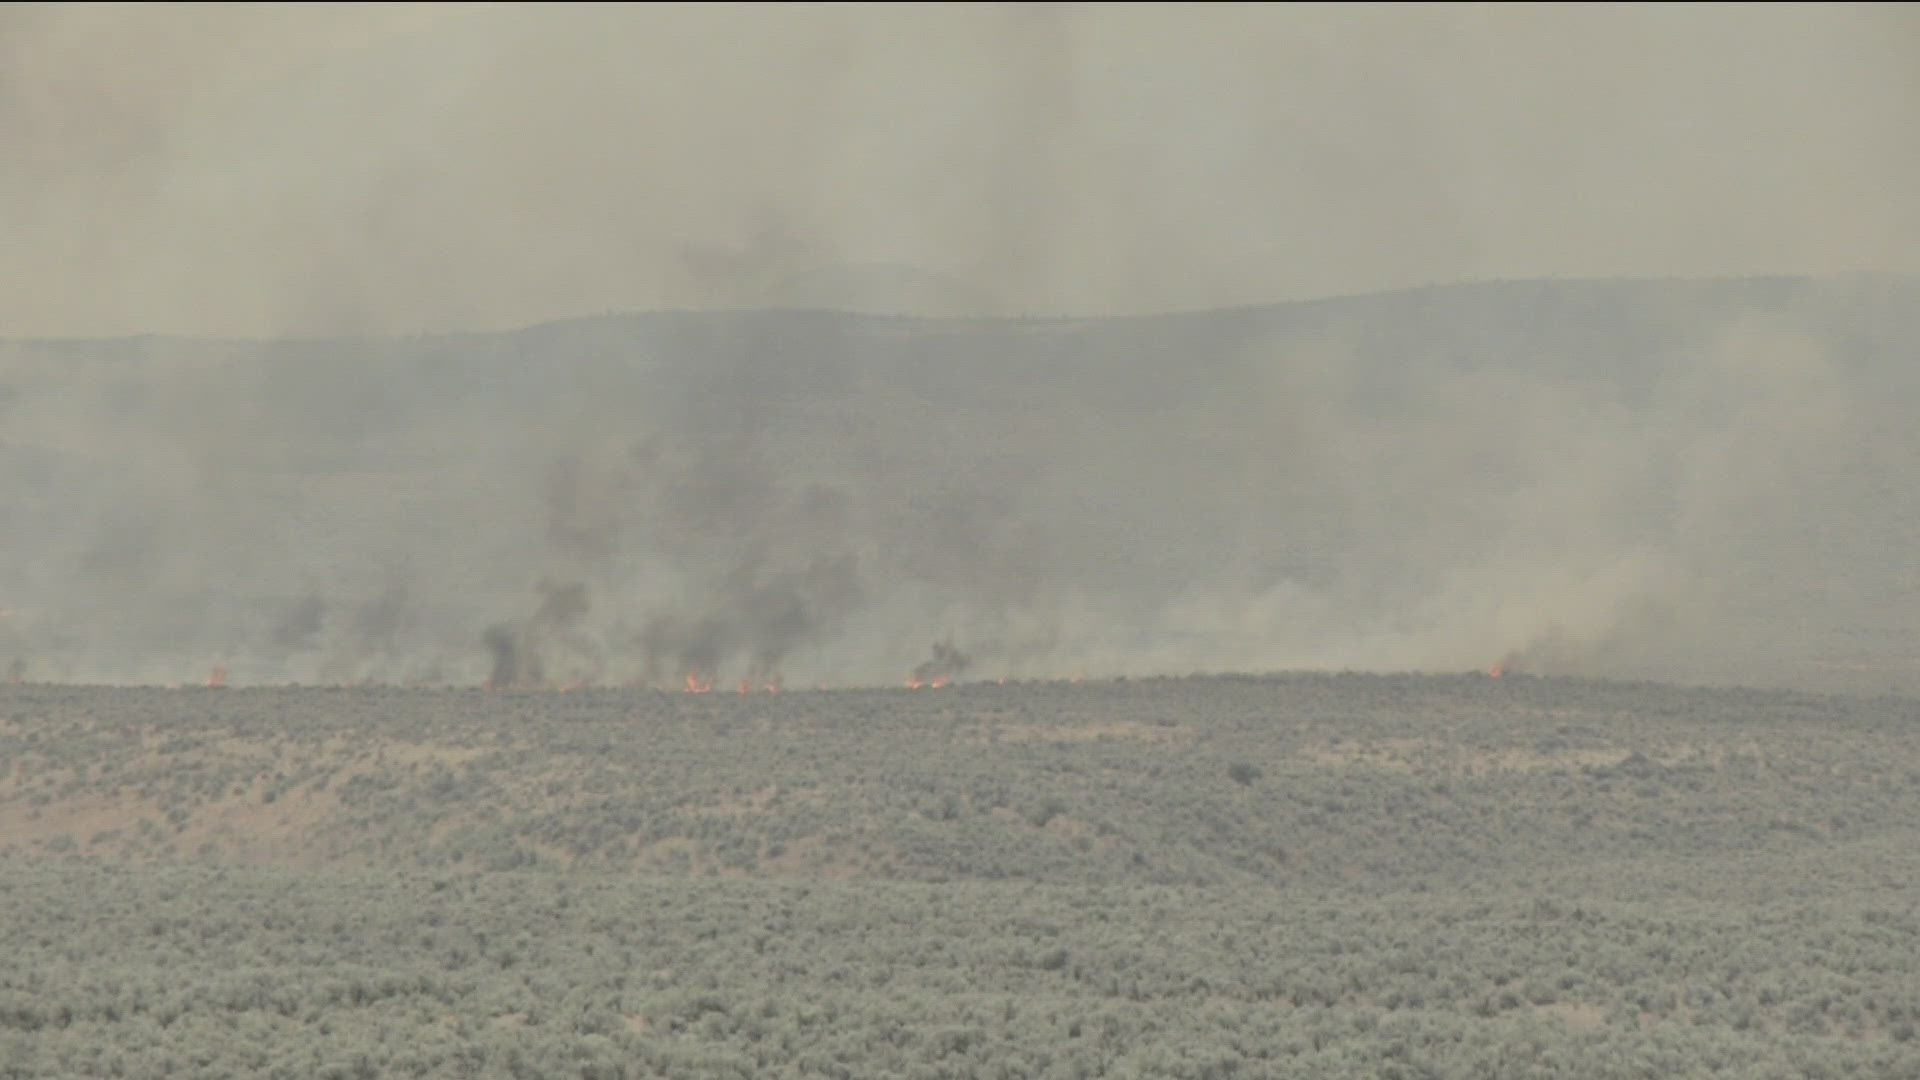 On Friday afternoon, Vale District BLM reported the Cow Valley Fire had burned roughly 73,727 acres.